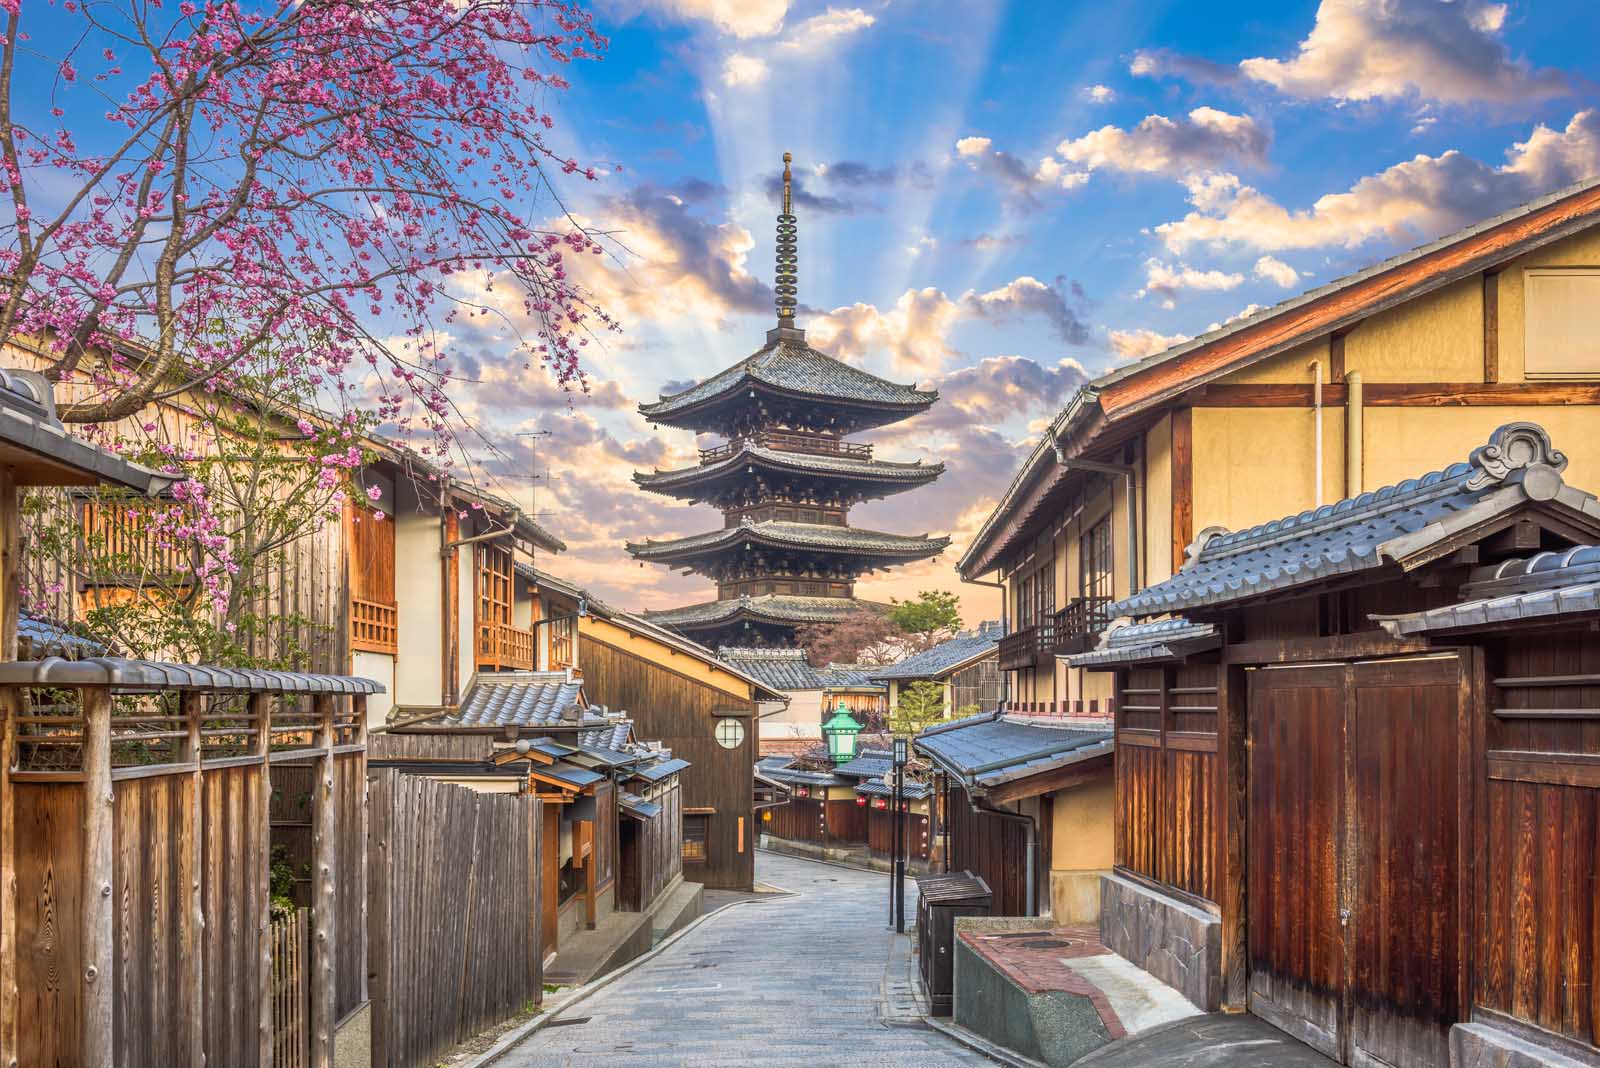 How to spend one day in Kyoto, Japan | TouristSecrets